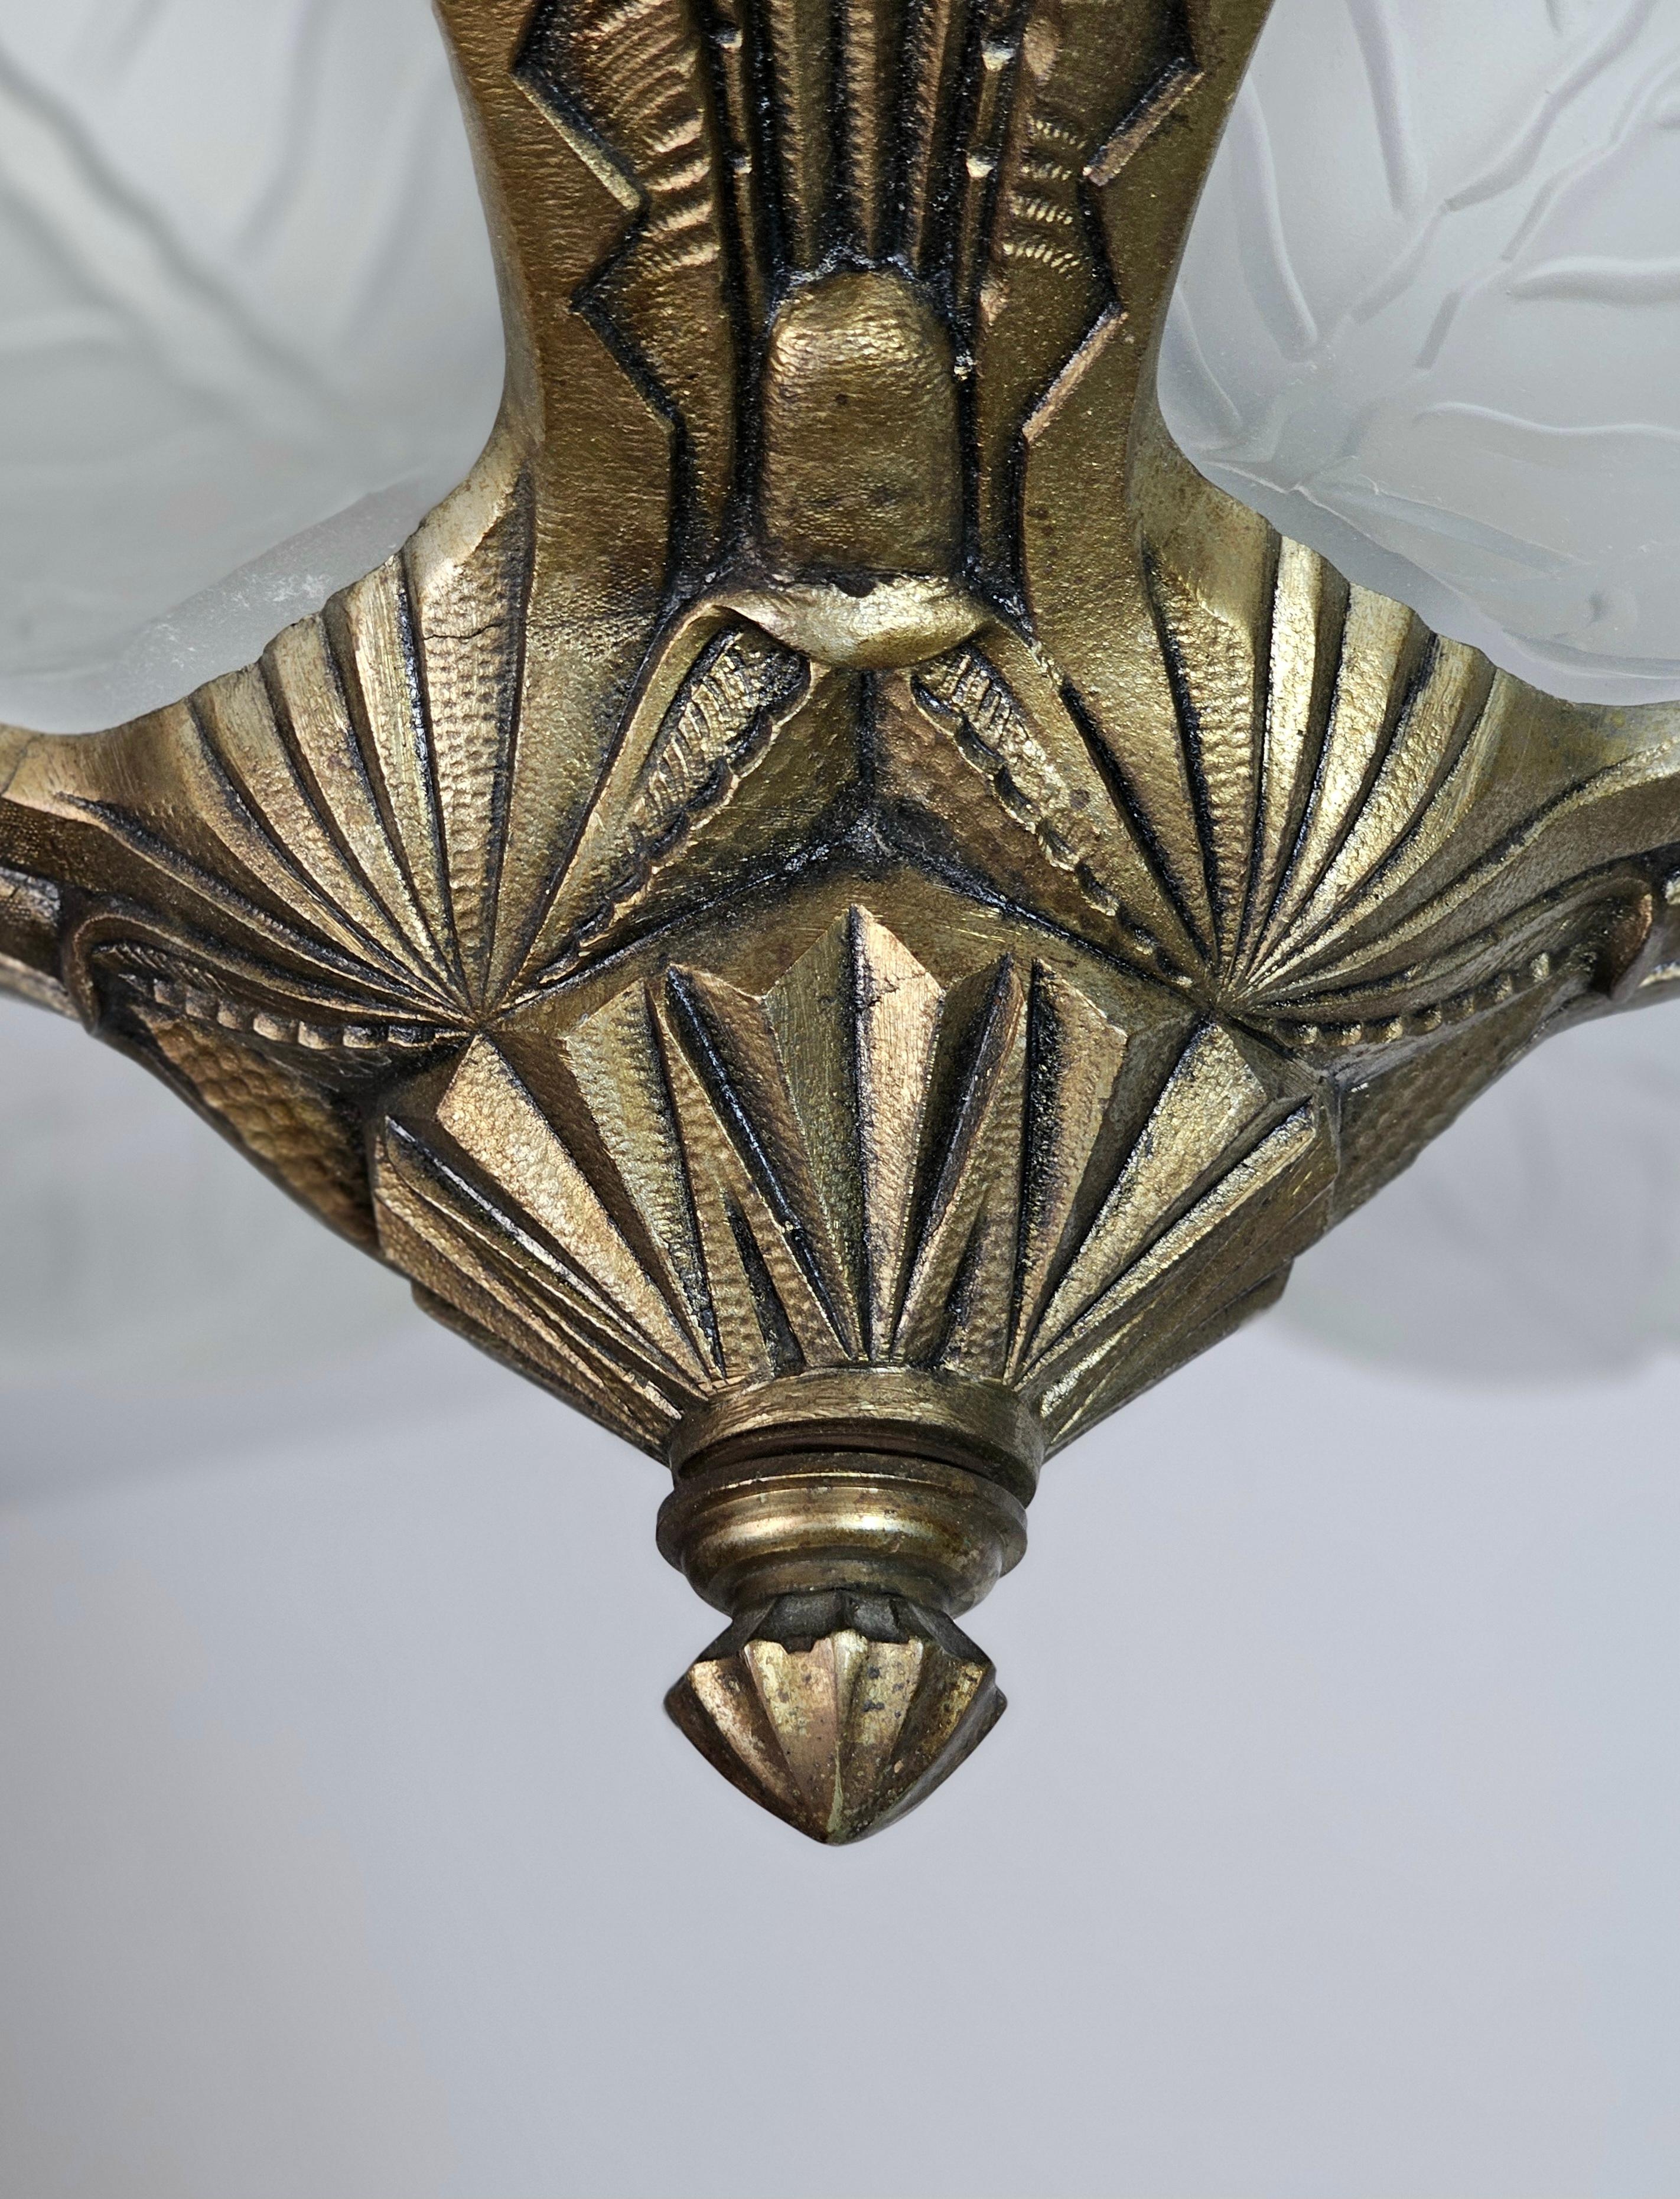 Chandelier Pendant Bronze Frosted Glass Art Deco French Design 1930s 1940s For Sale 5